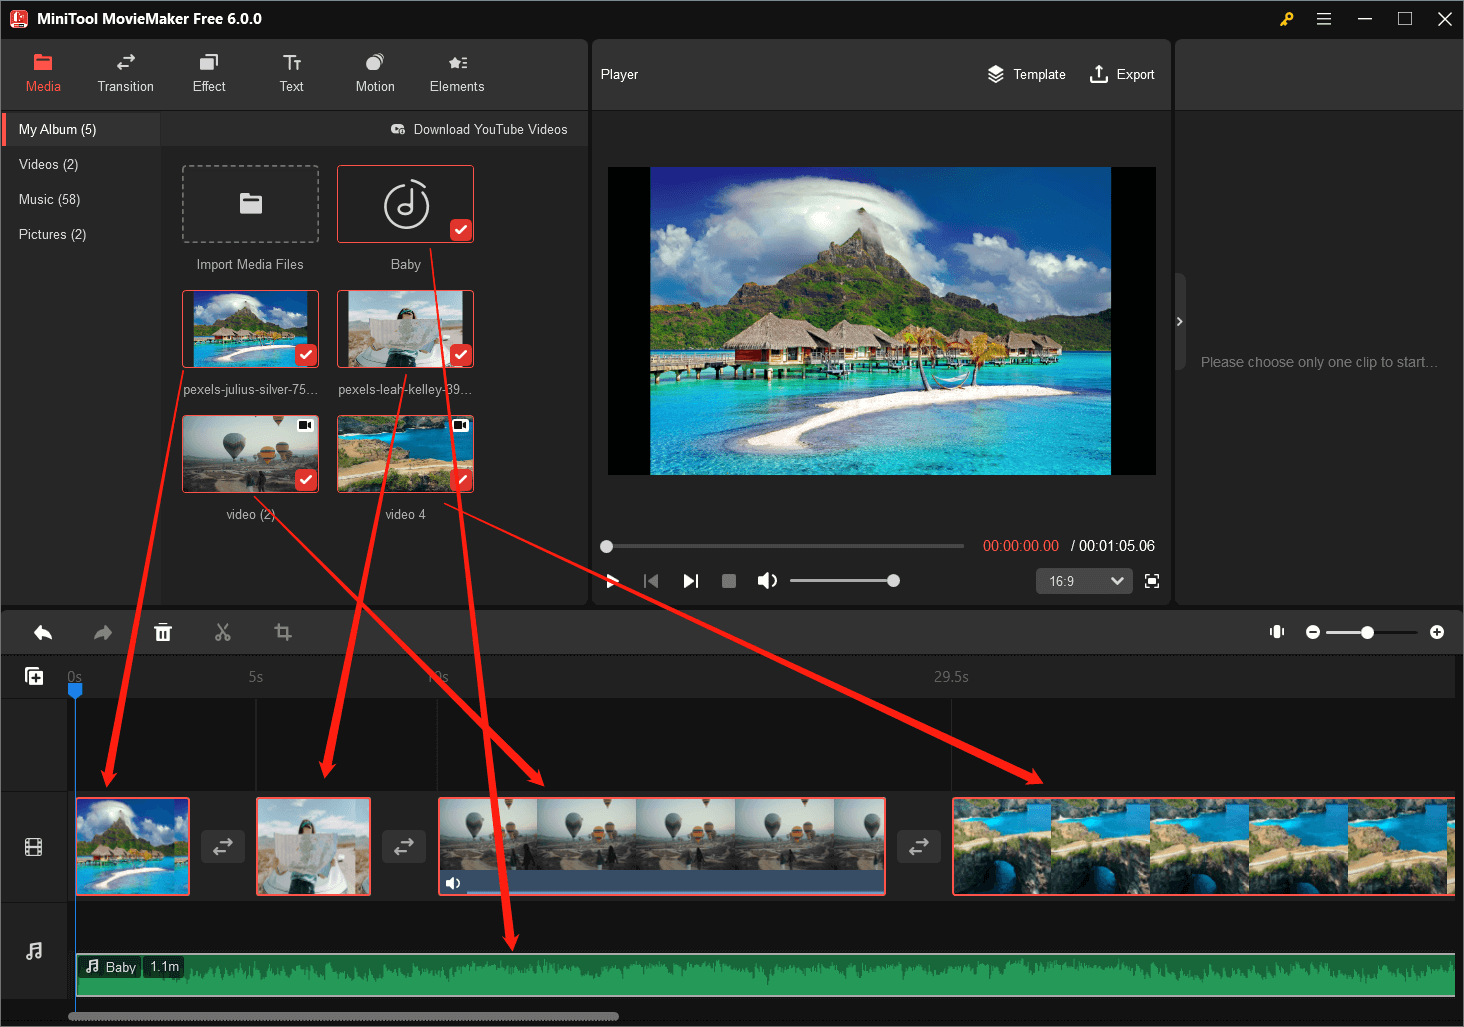 add media files to the correct timeline track